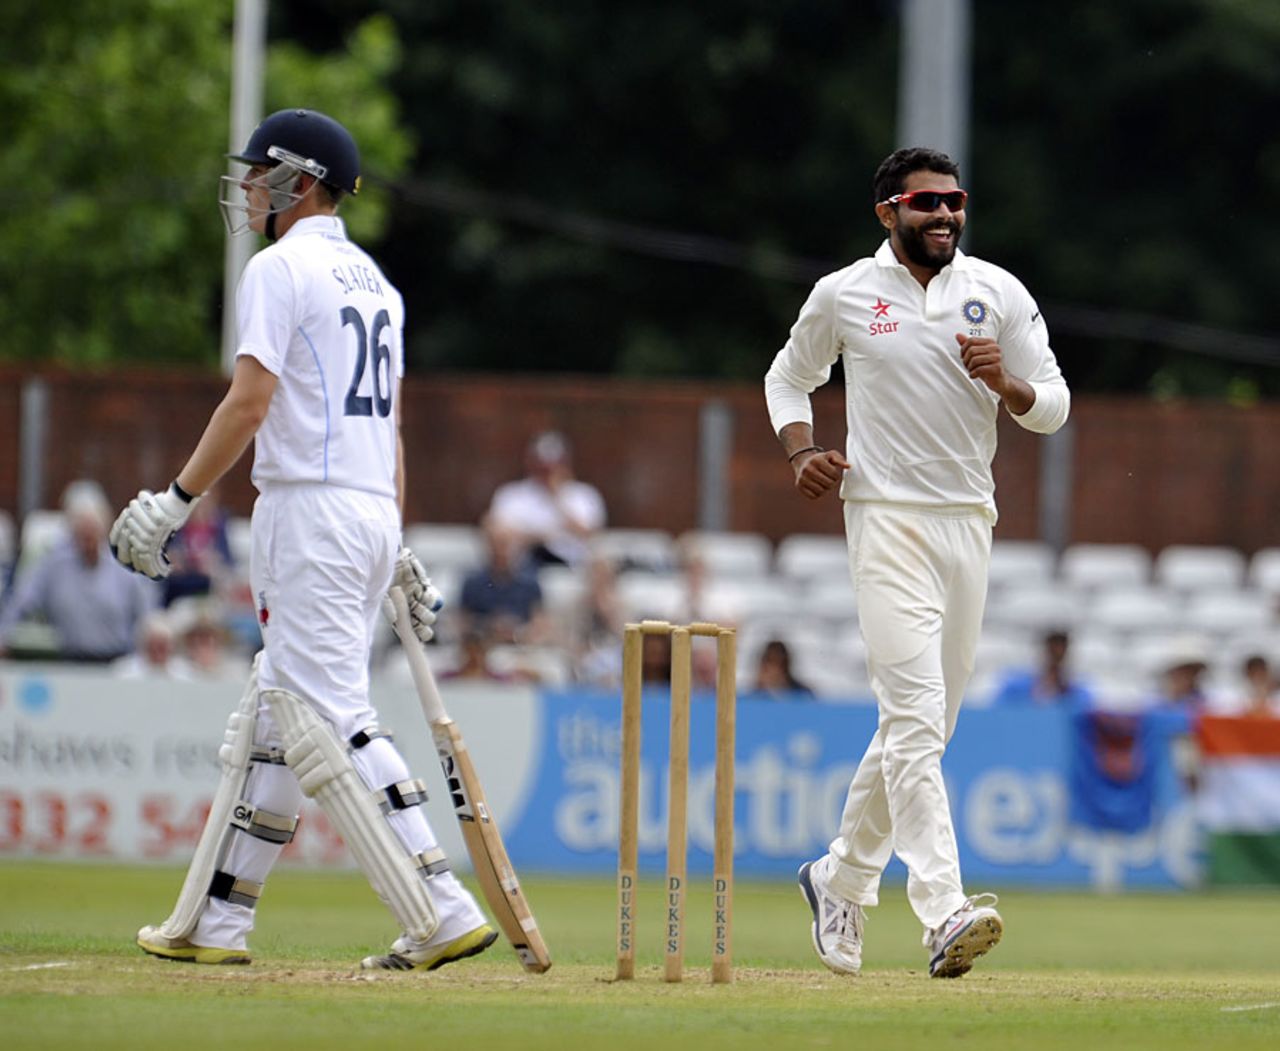 Ravindra Jadeja picked up two of the first three wickets, Derbyshire v Indians, tour match, Derby, 1st day, July 1, 2014